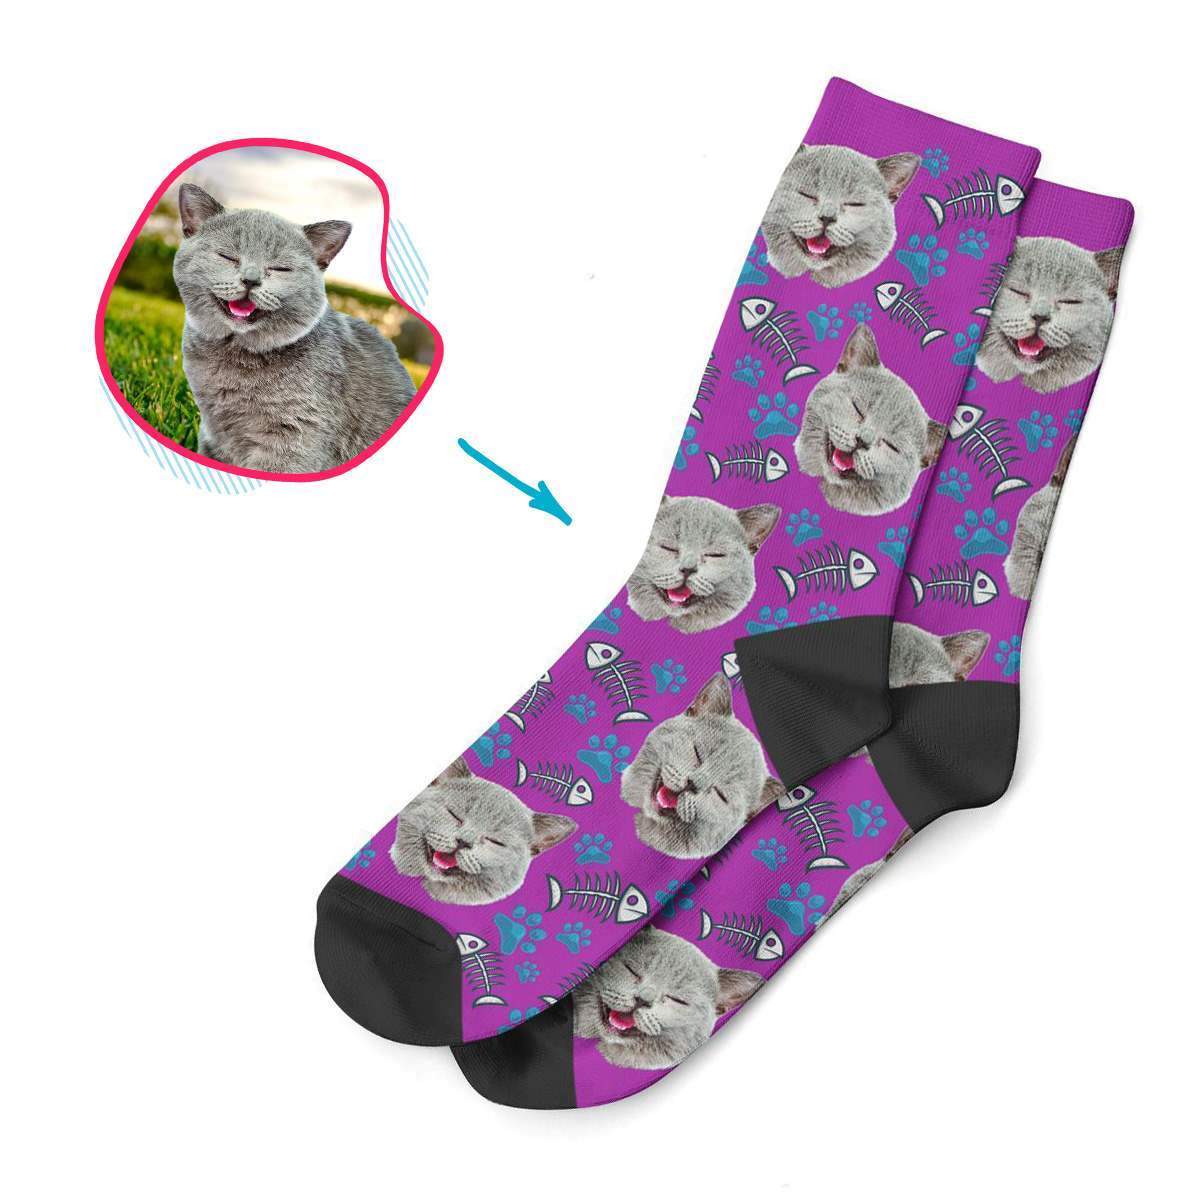 purple Cat socks personalized with photo of face printed on them